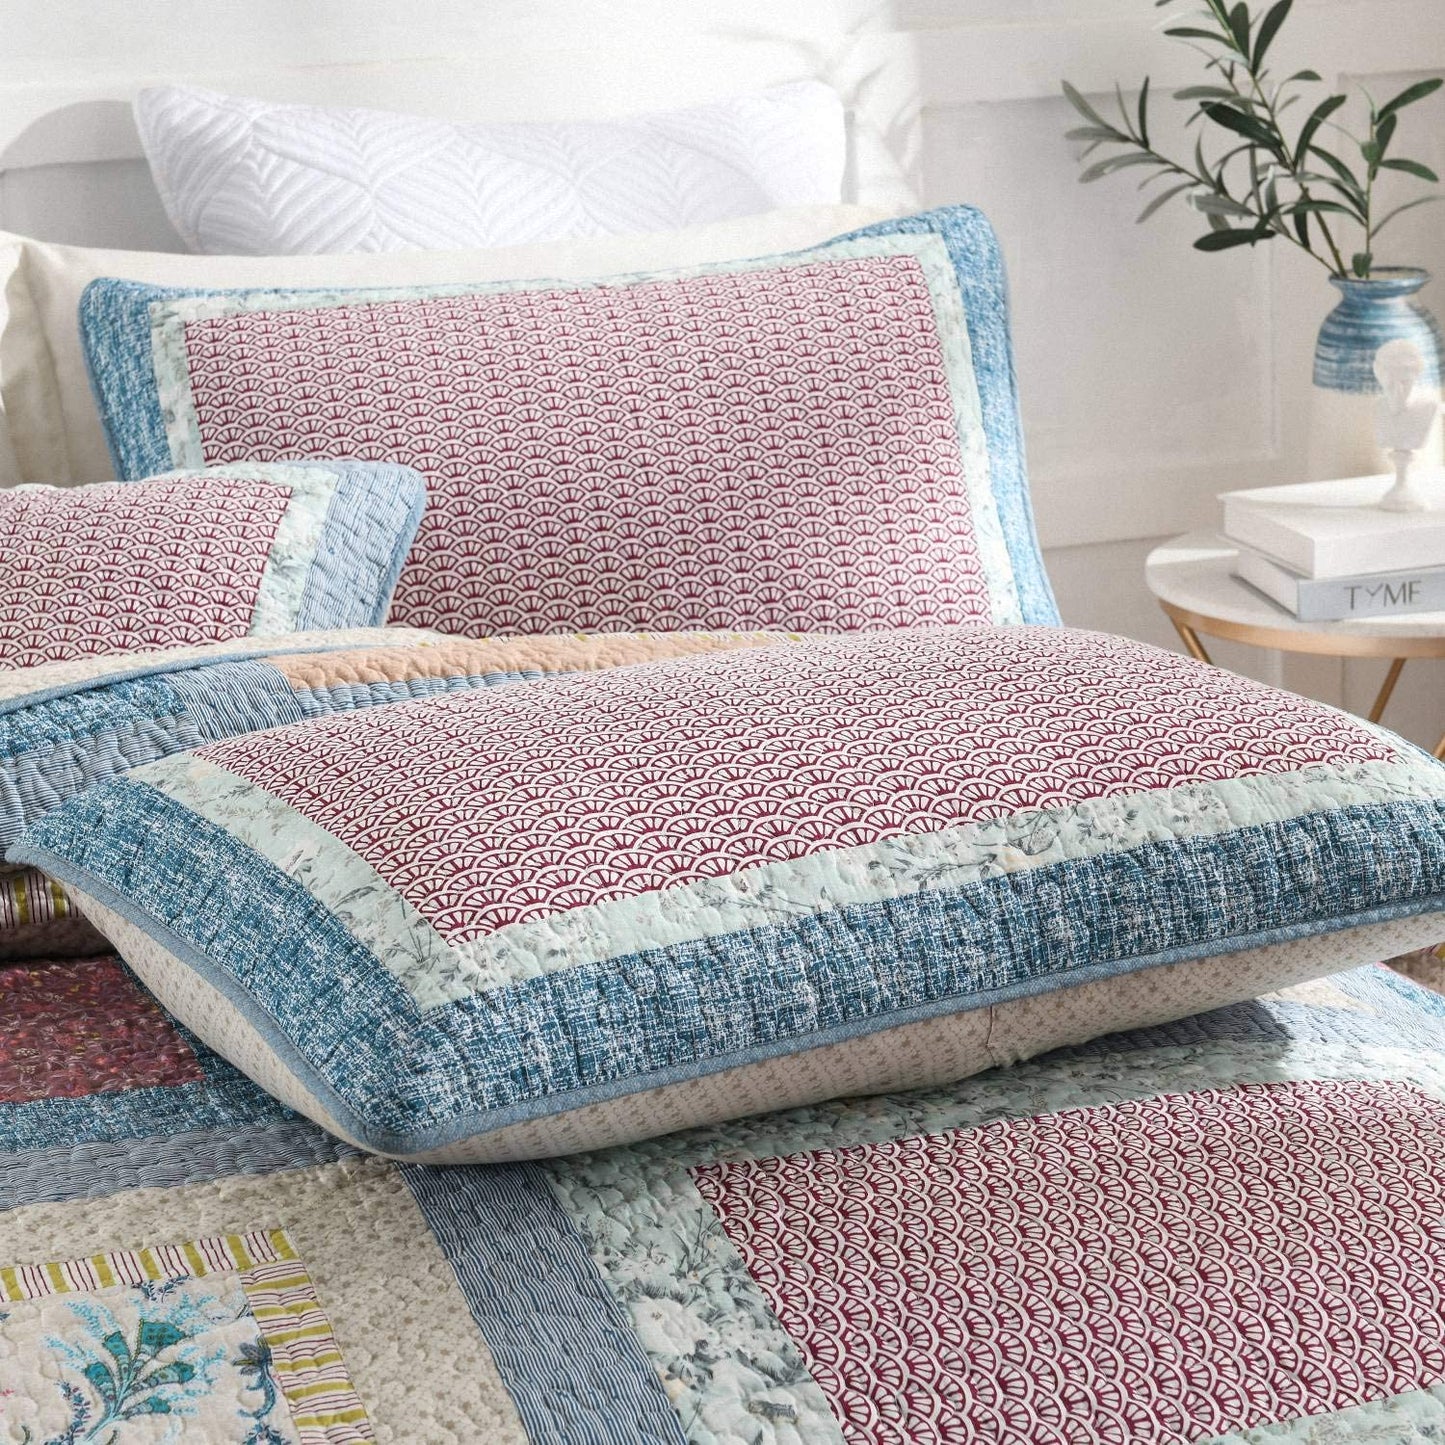 Cotton Bohemian Floral Pattern Bedspread Quilt Set with Real Stitched Embroidery